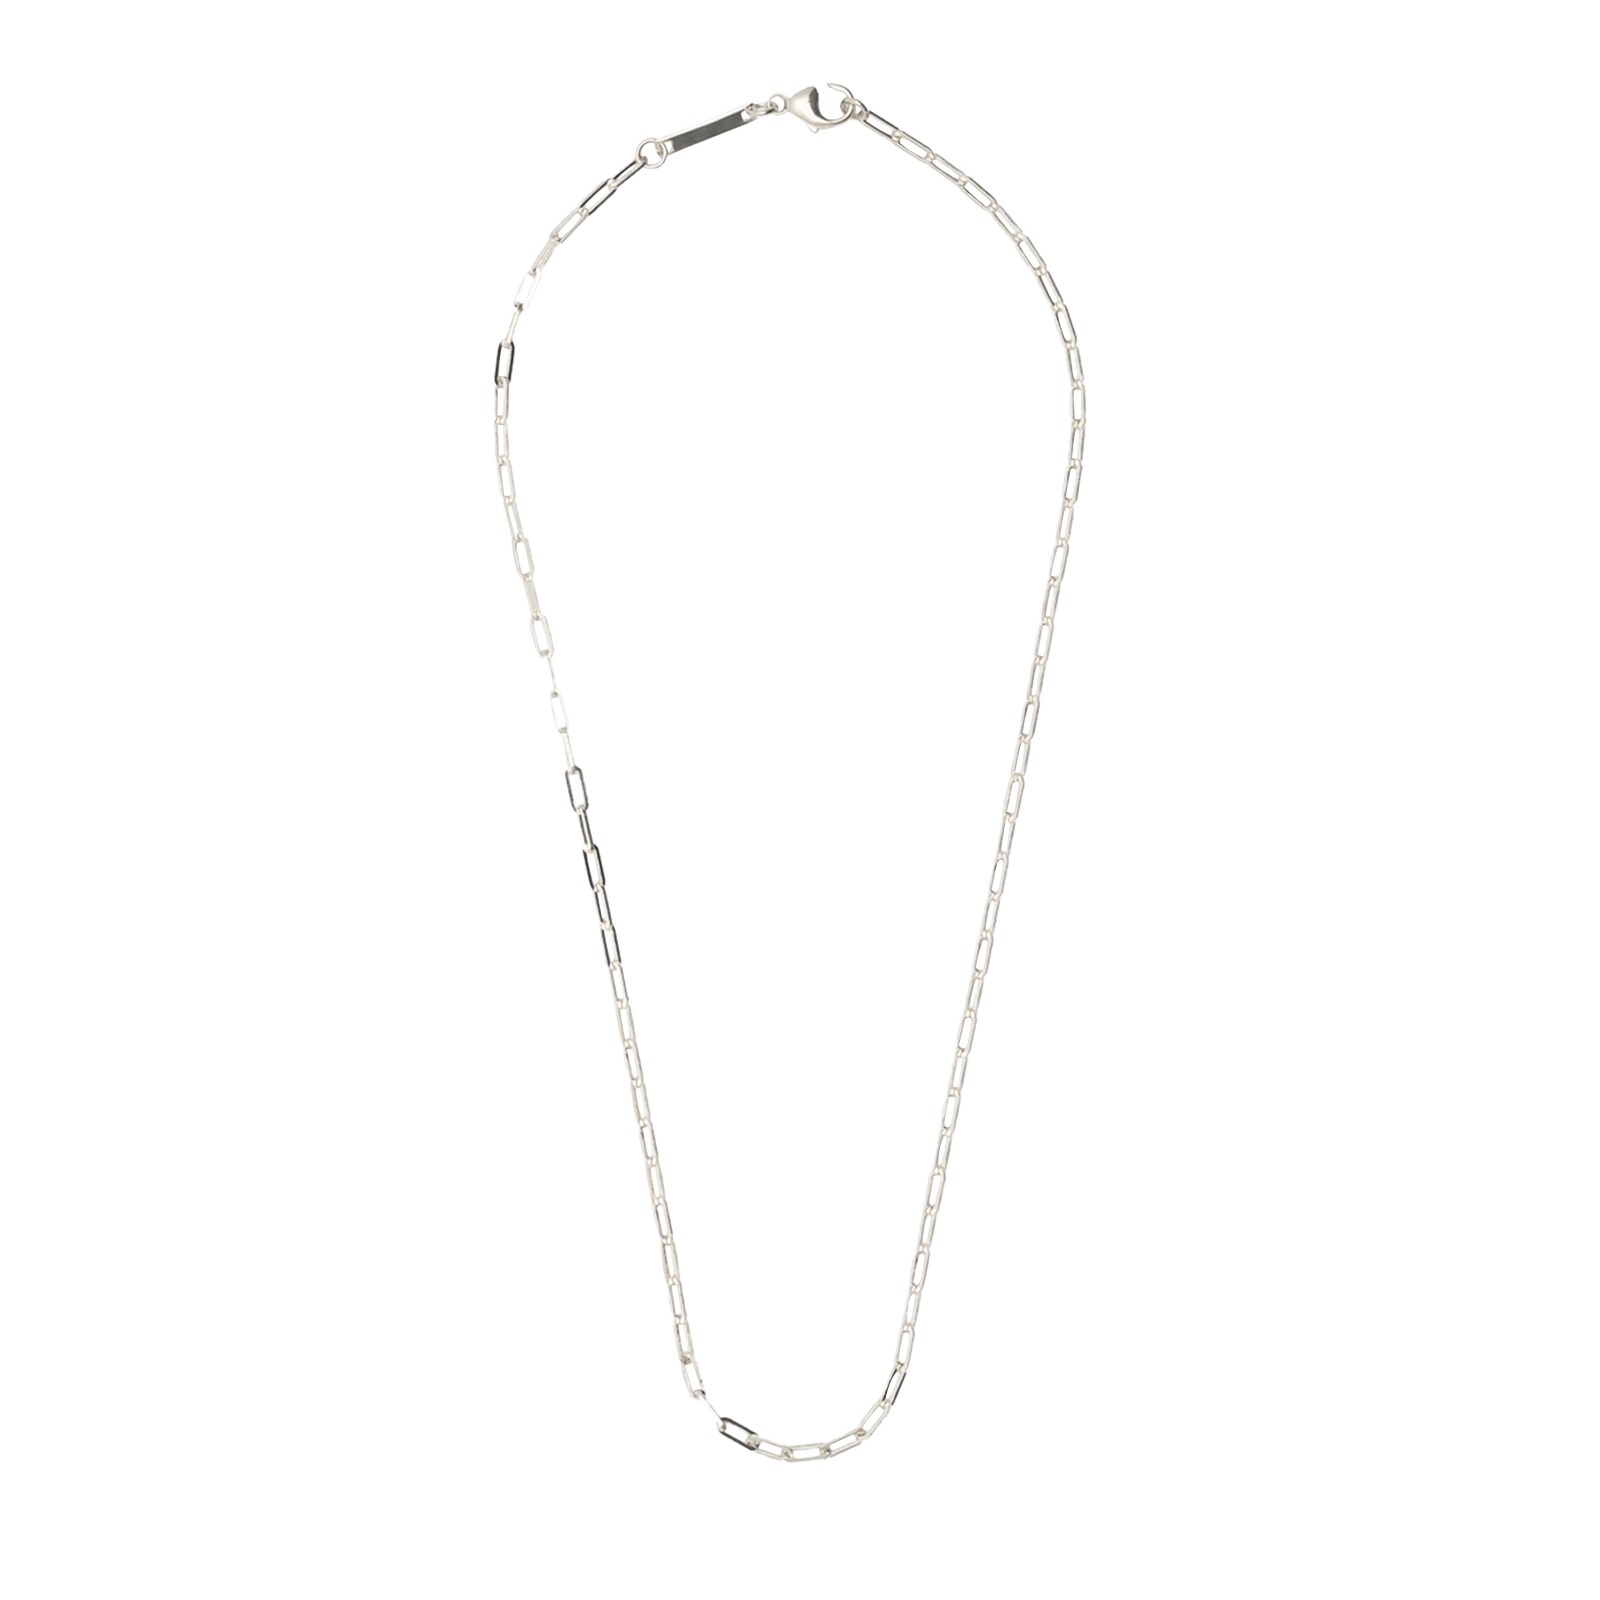 Real Diamond Necklace in Sterling Silver 0.33 Carat India | Ubuy